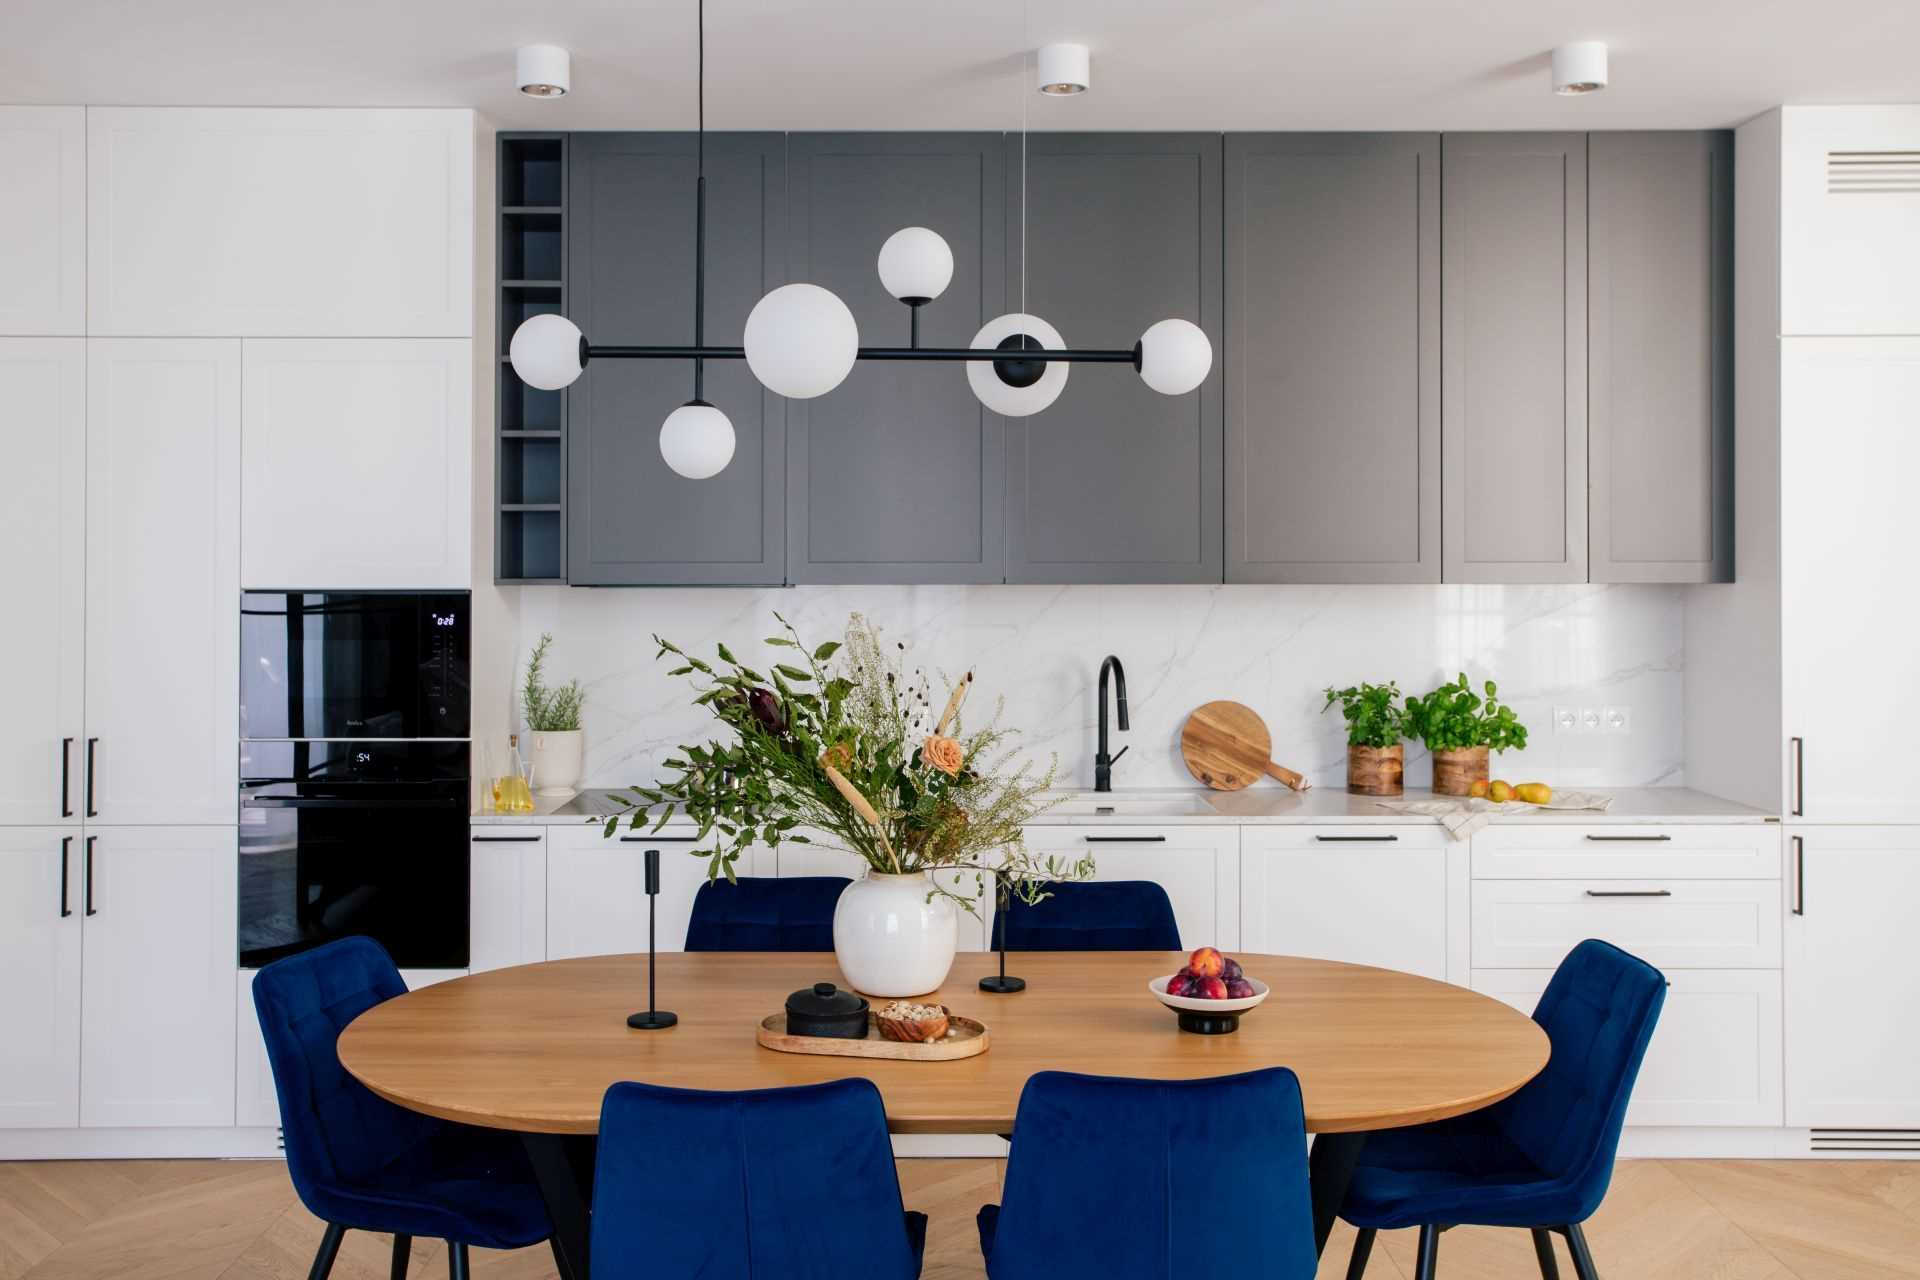 This modern dining area features an oval table with blue upholstered chairs, while the kitchen includes white and grey cabinetry.